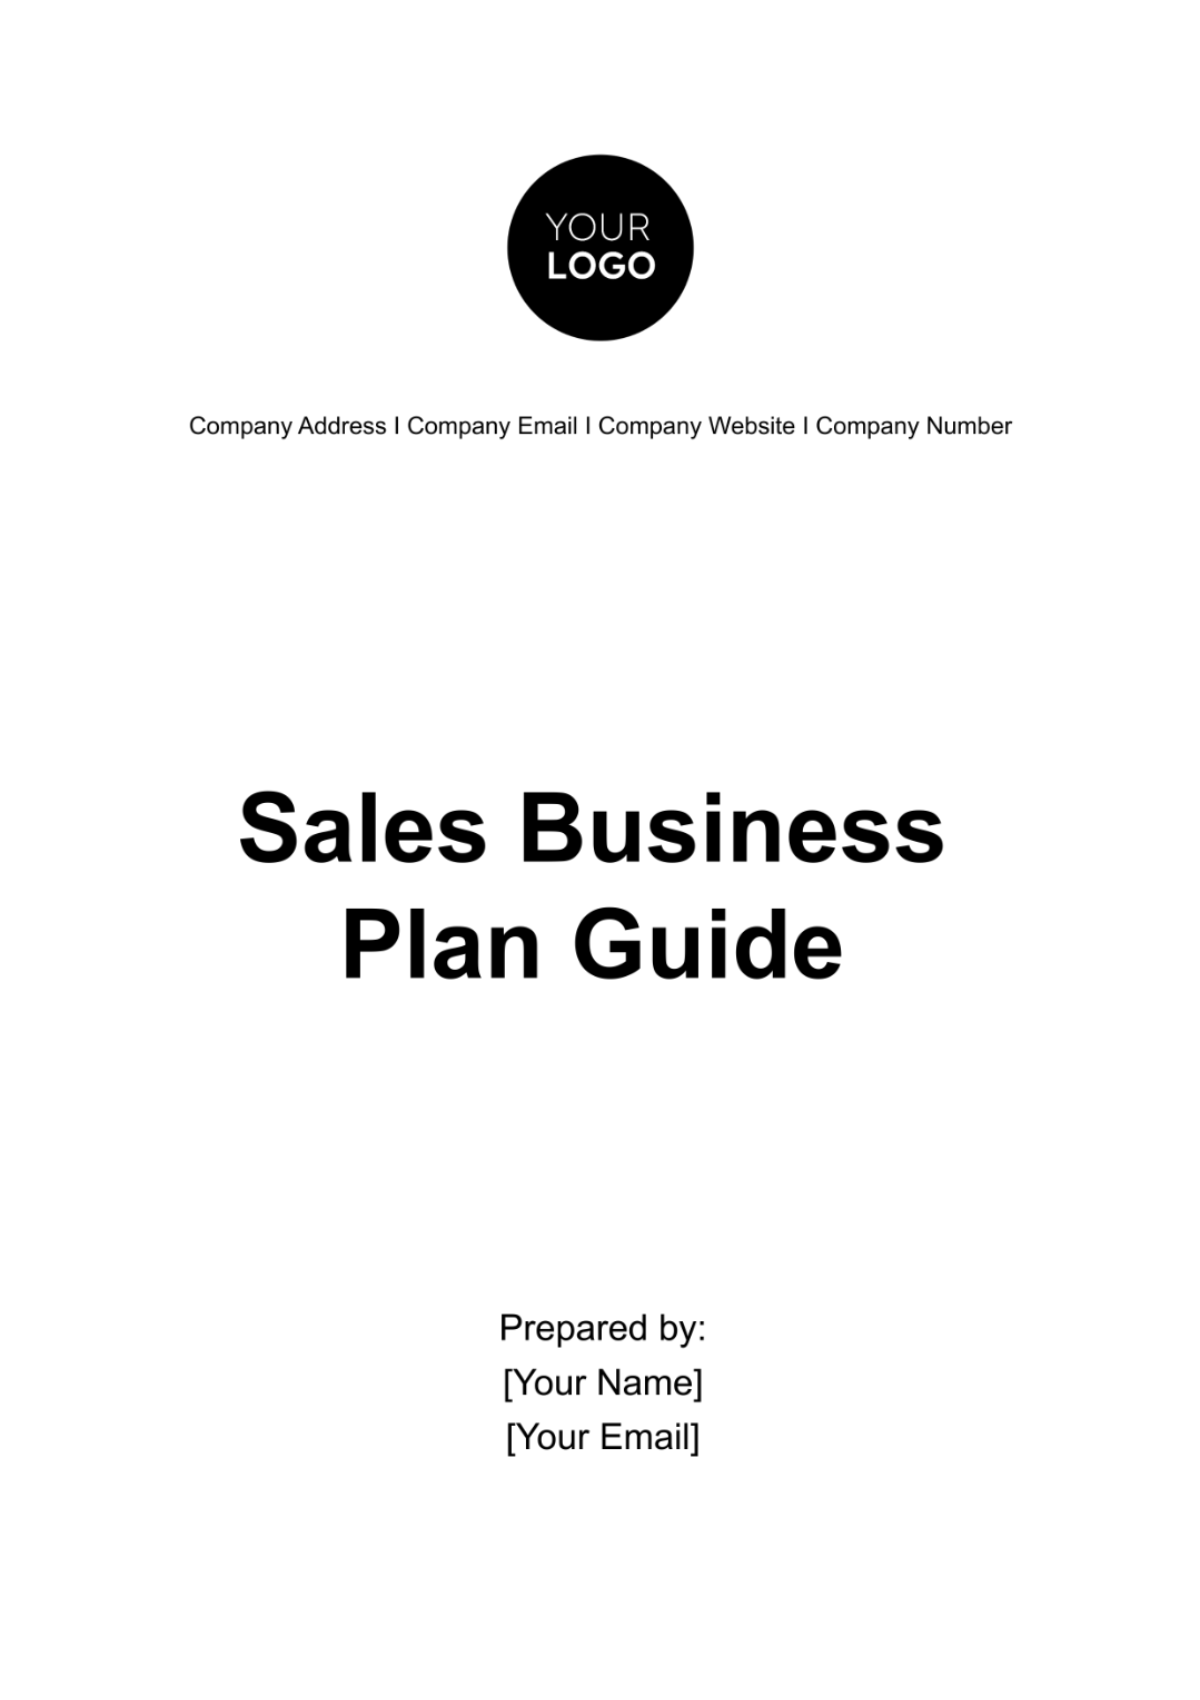 Free Sales Business Plan Guide Template